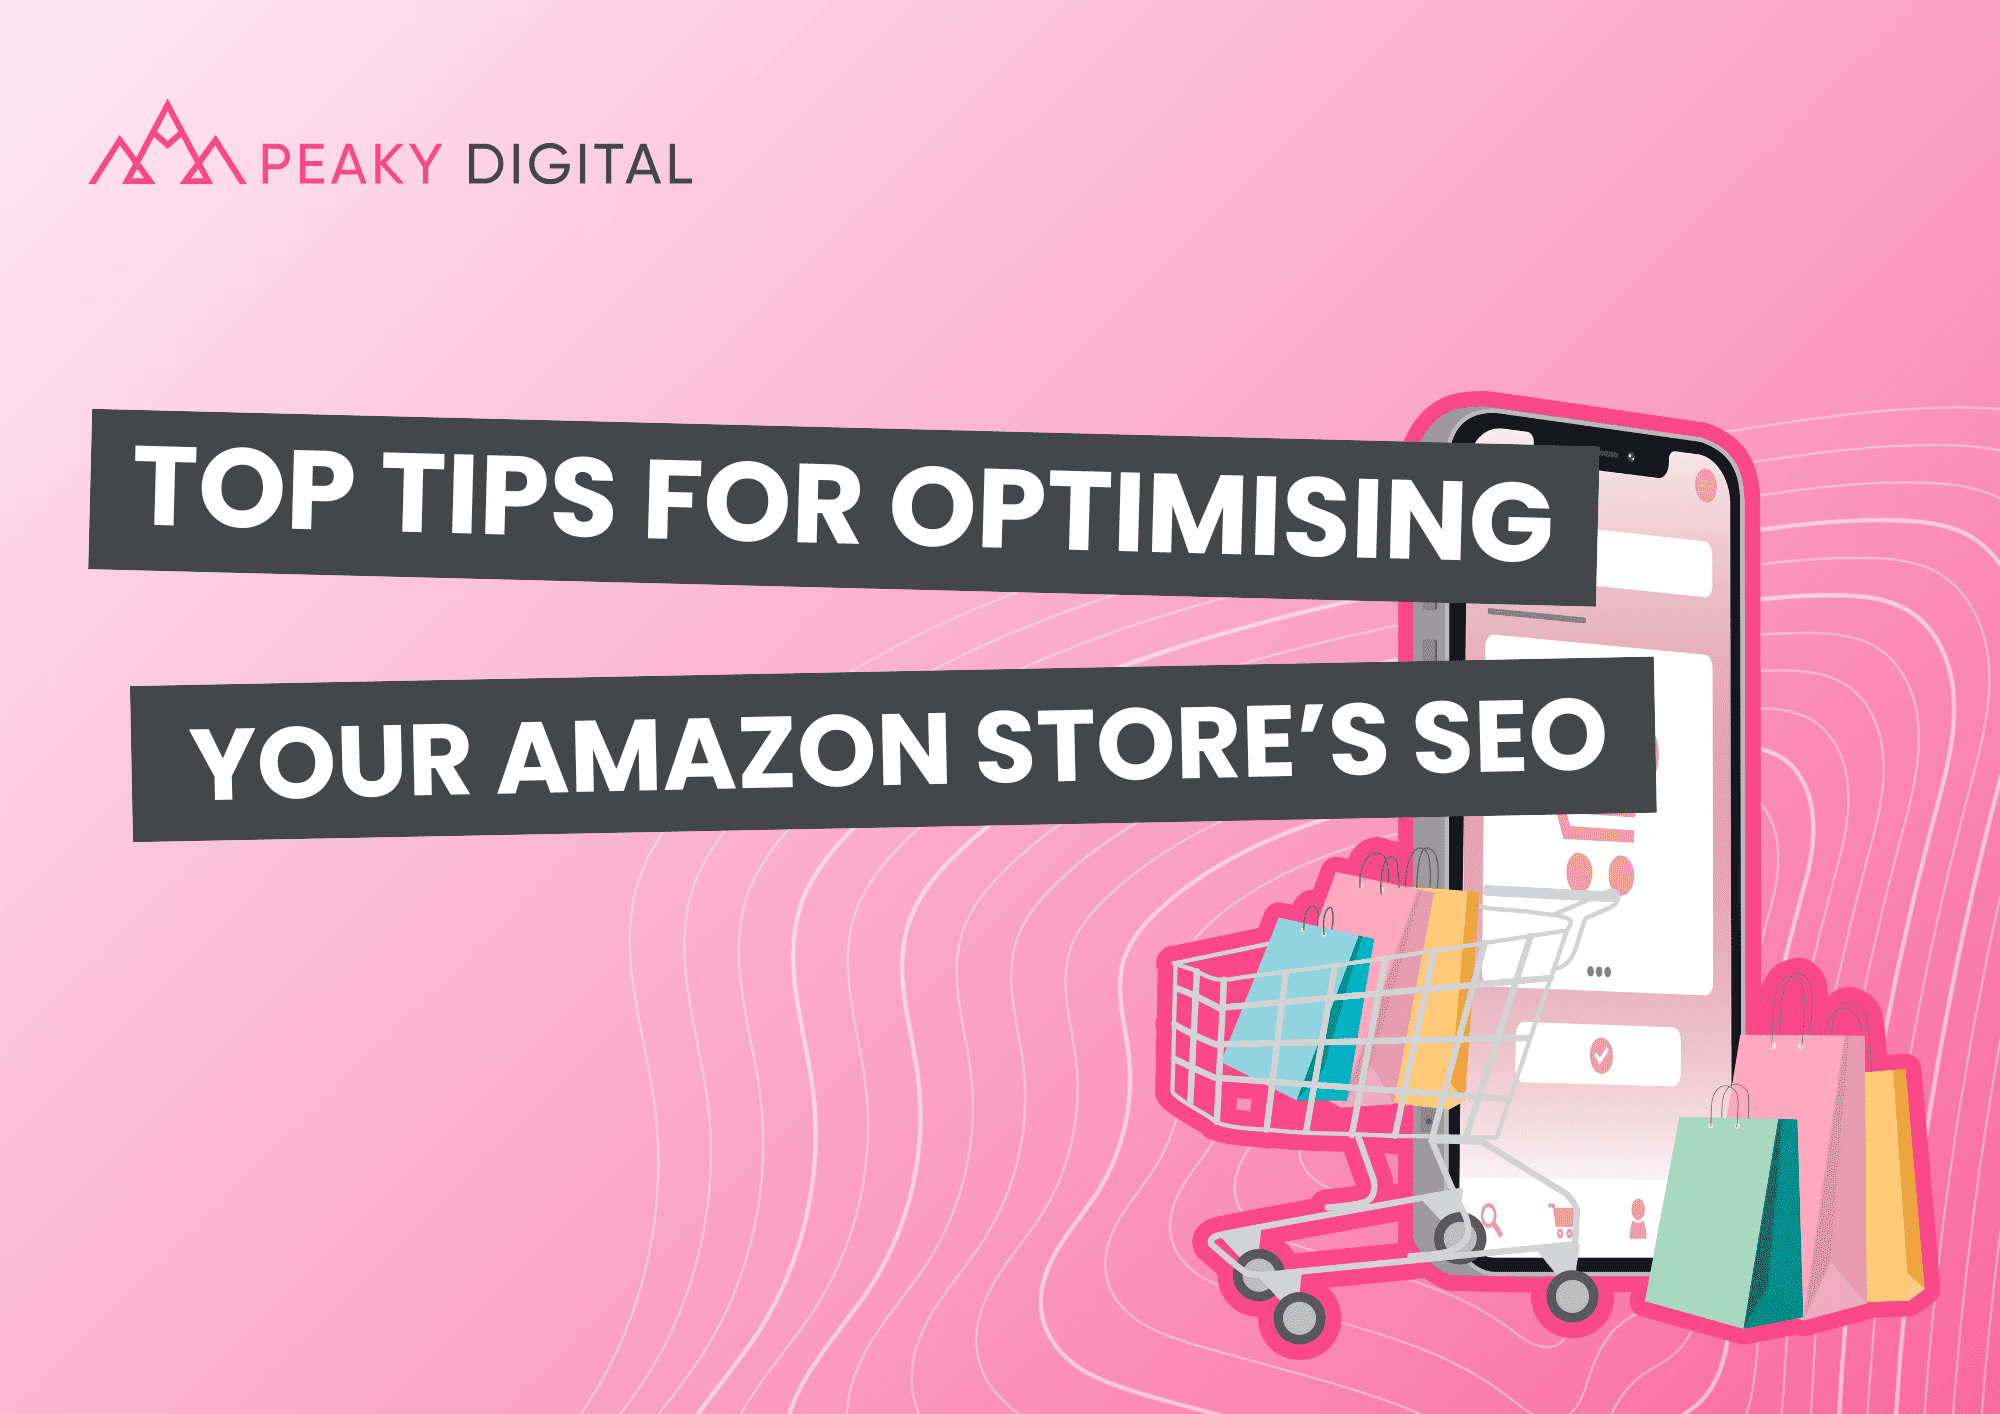 Top Tips for Optimising Your Amazon Store's SEO